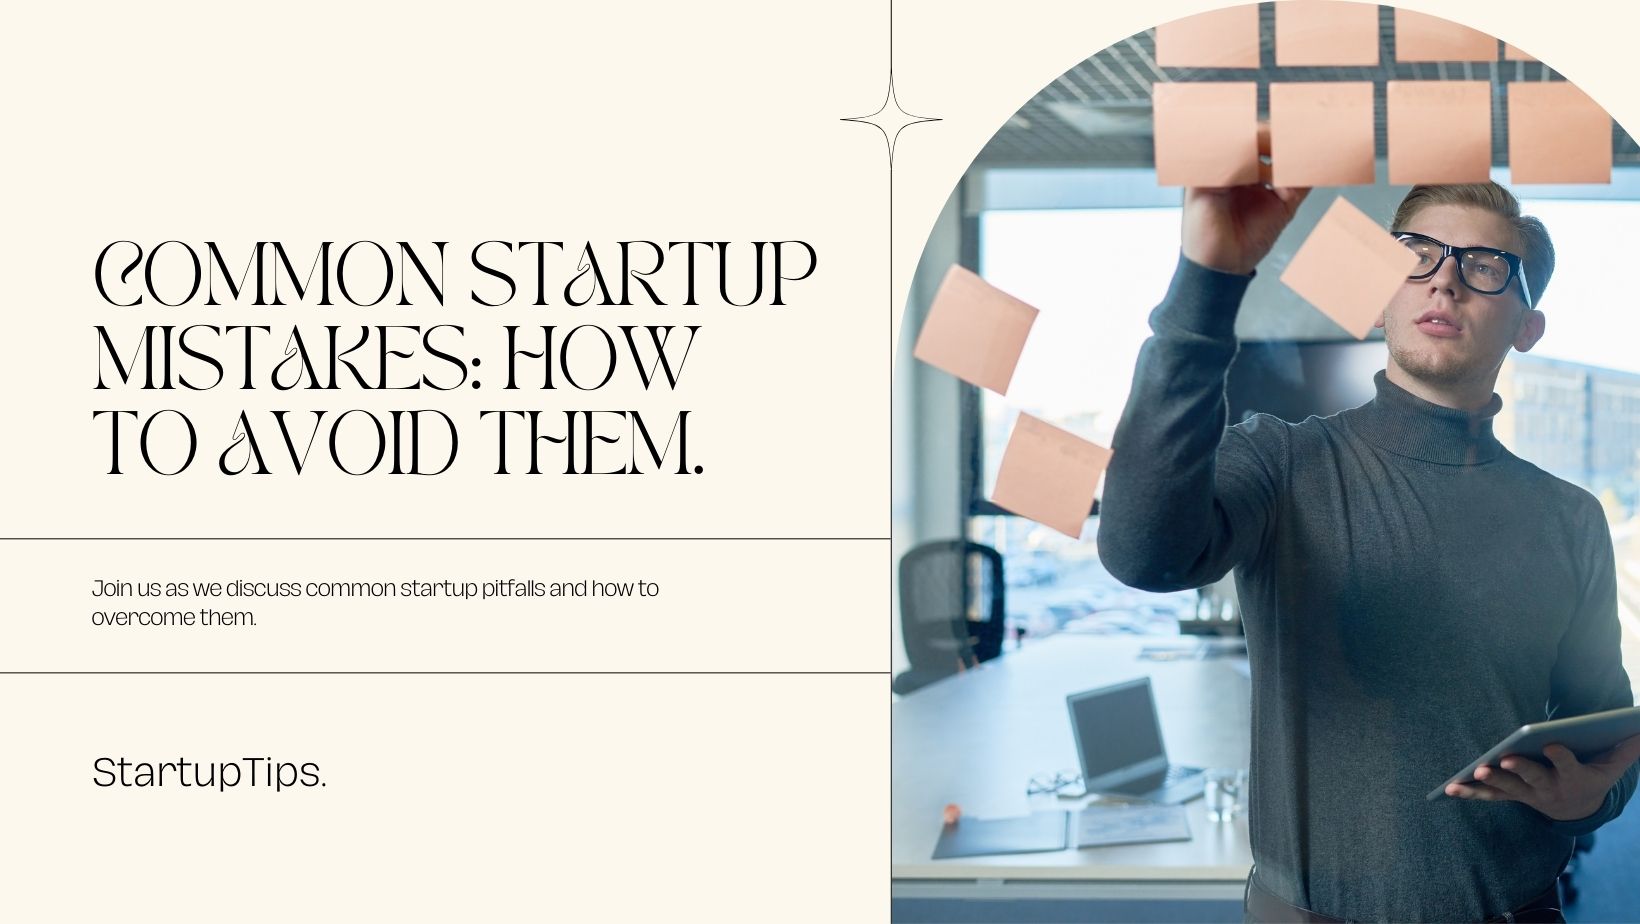 What Common Mistakes Made by Startups